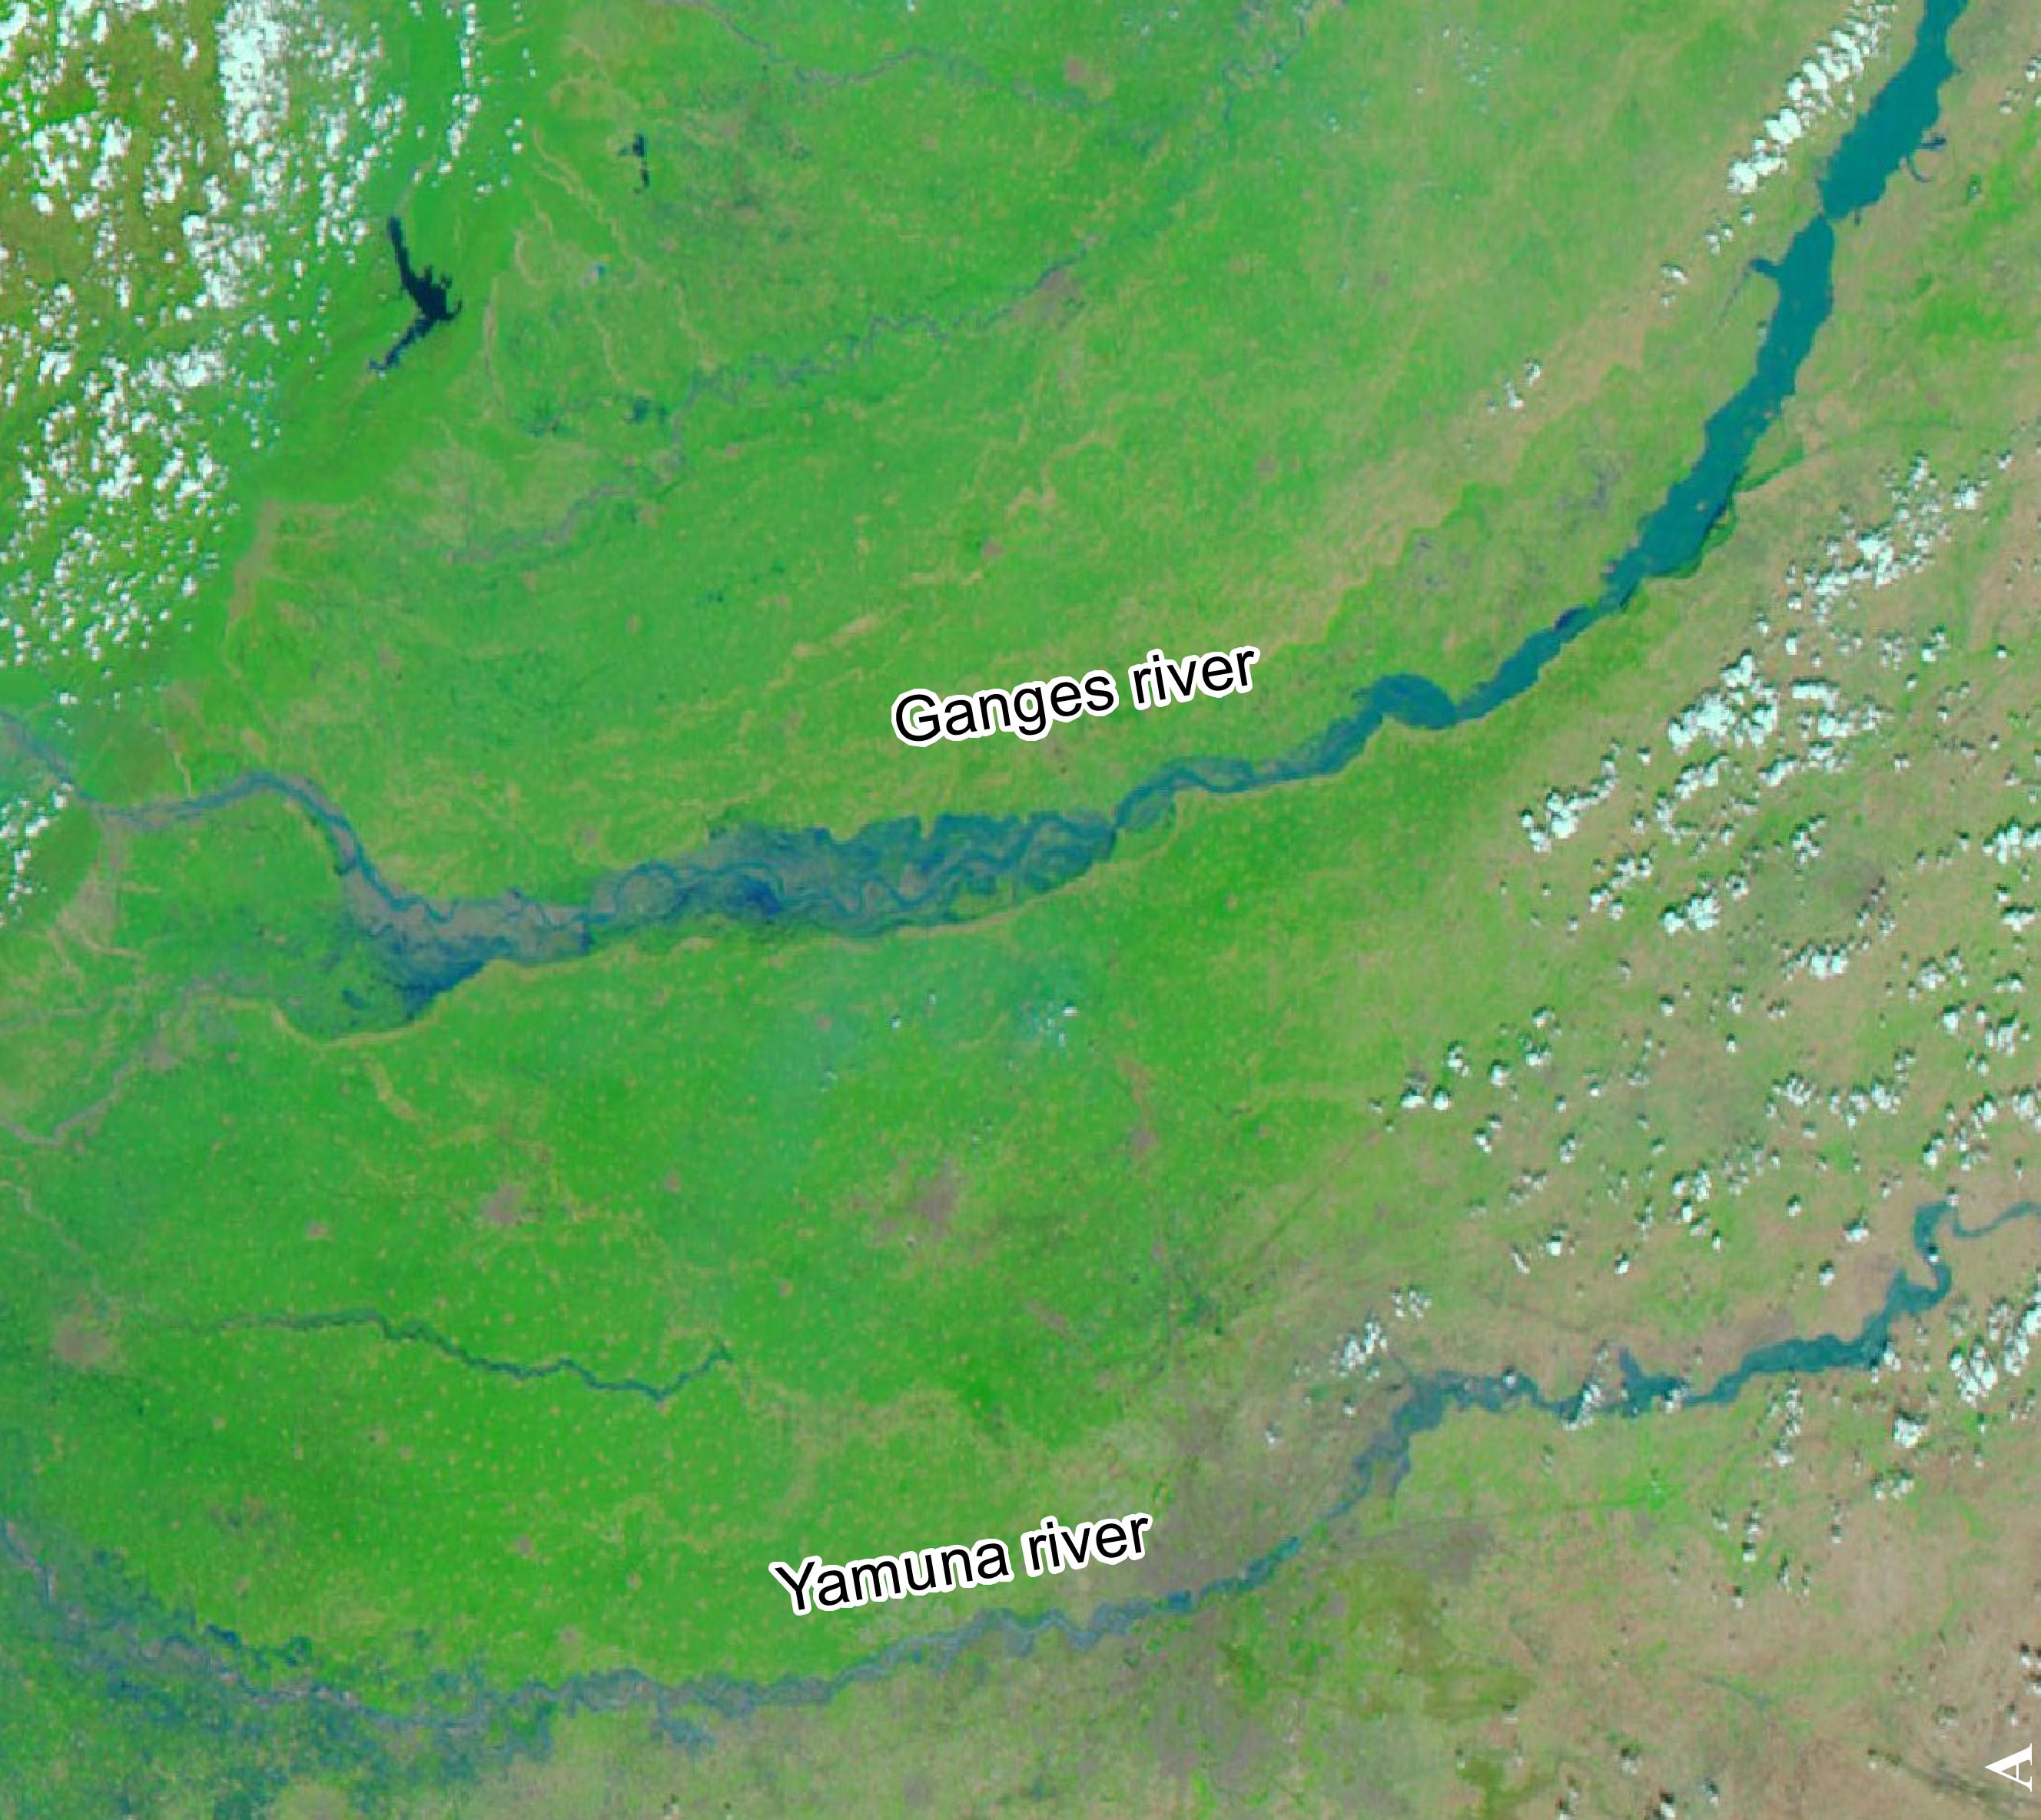 Ganges and Yamuna river seen from space by MODIS/Aqua on 21 June 2013